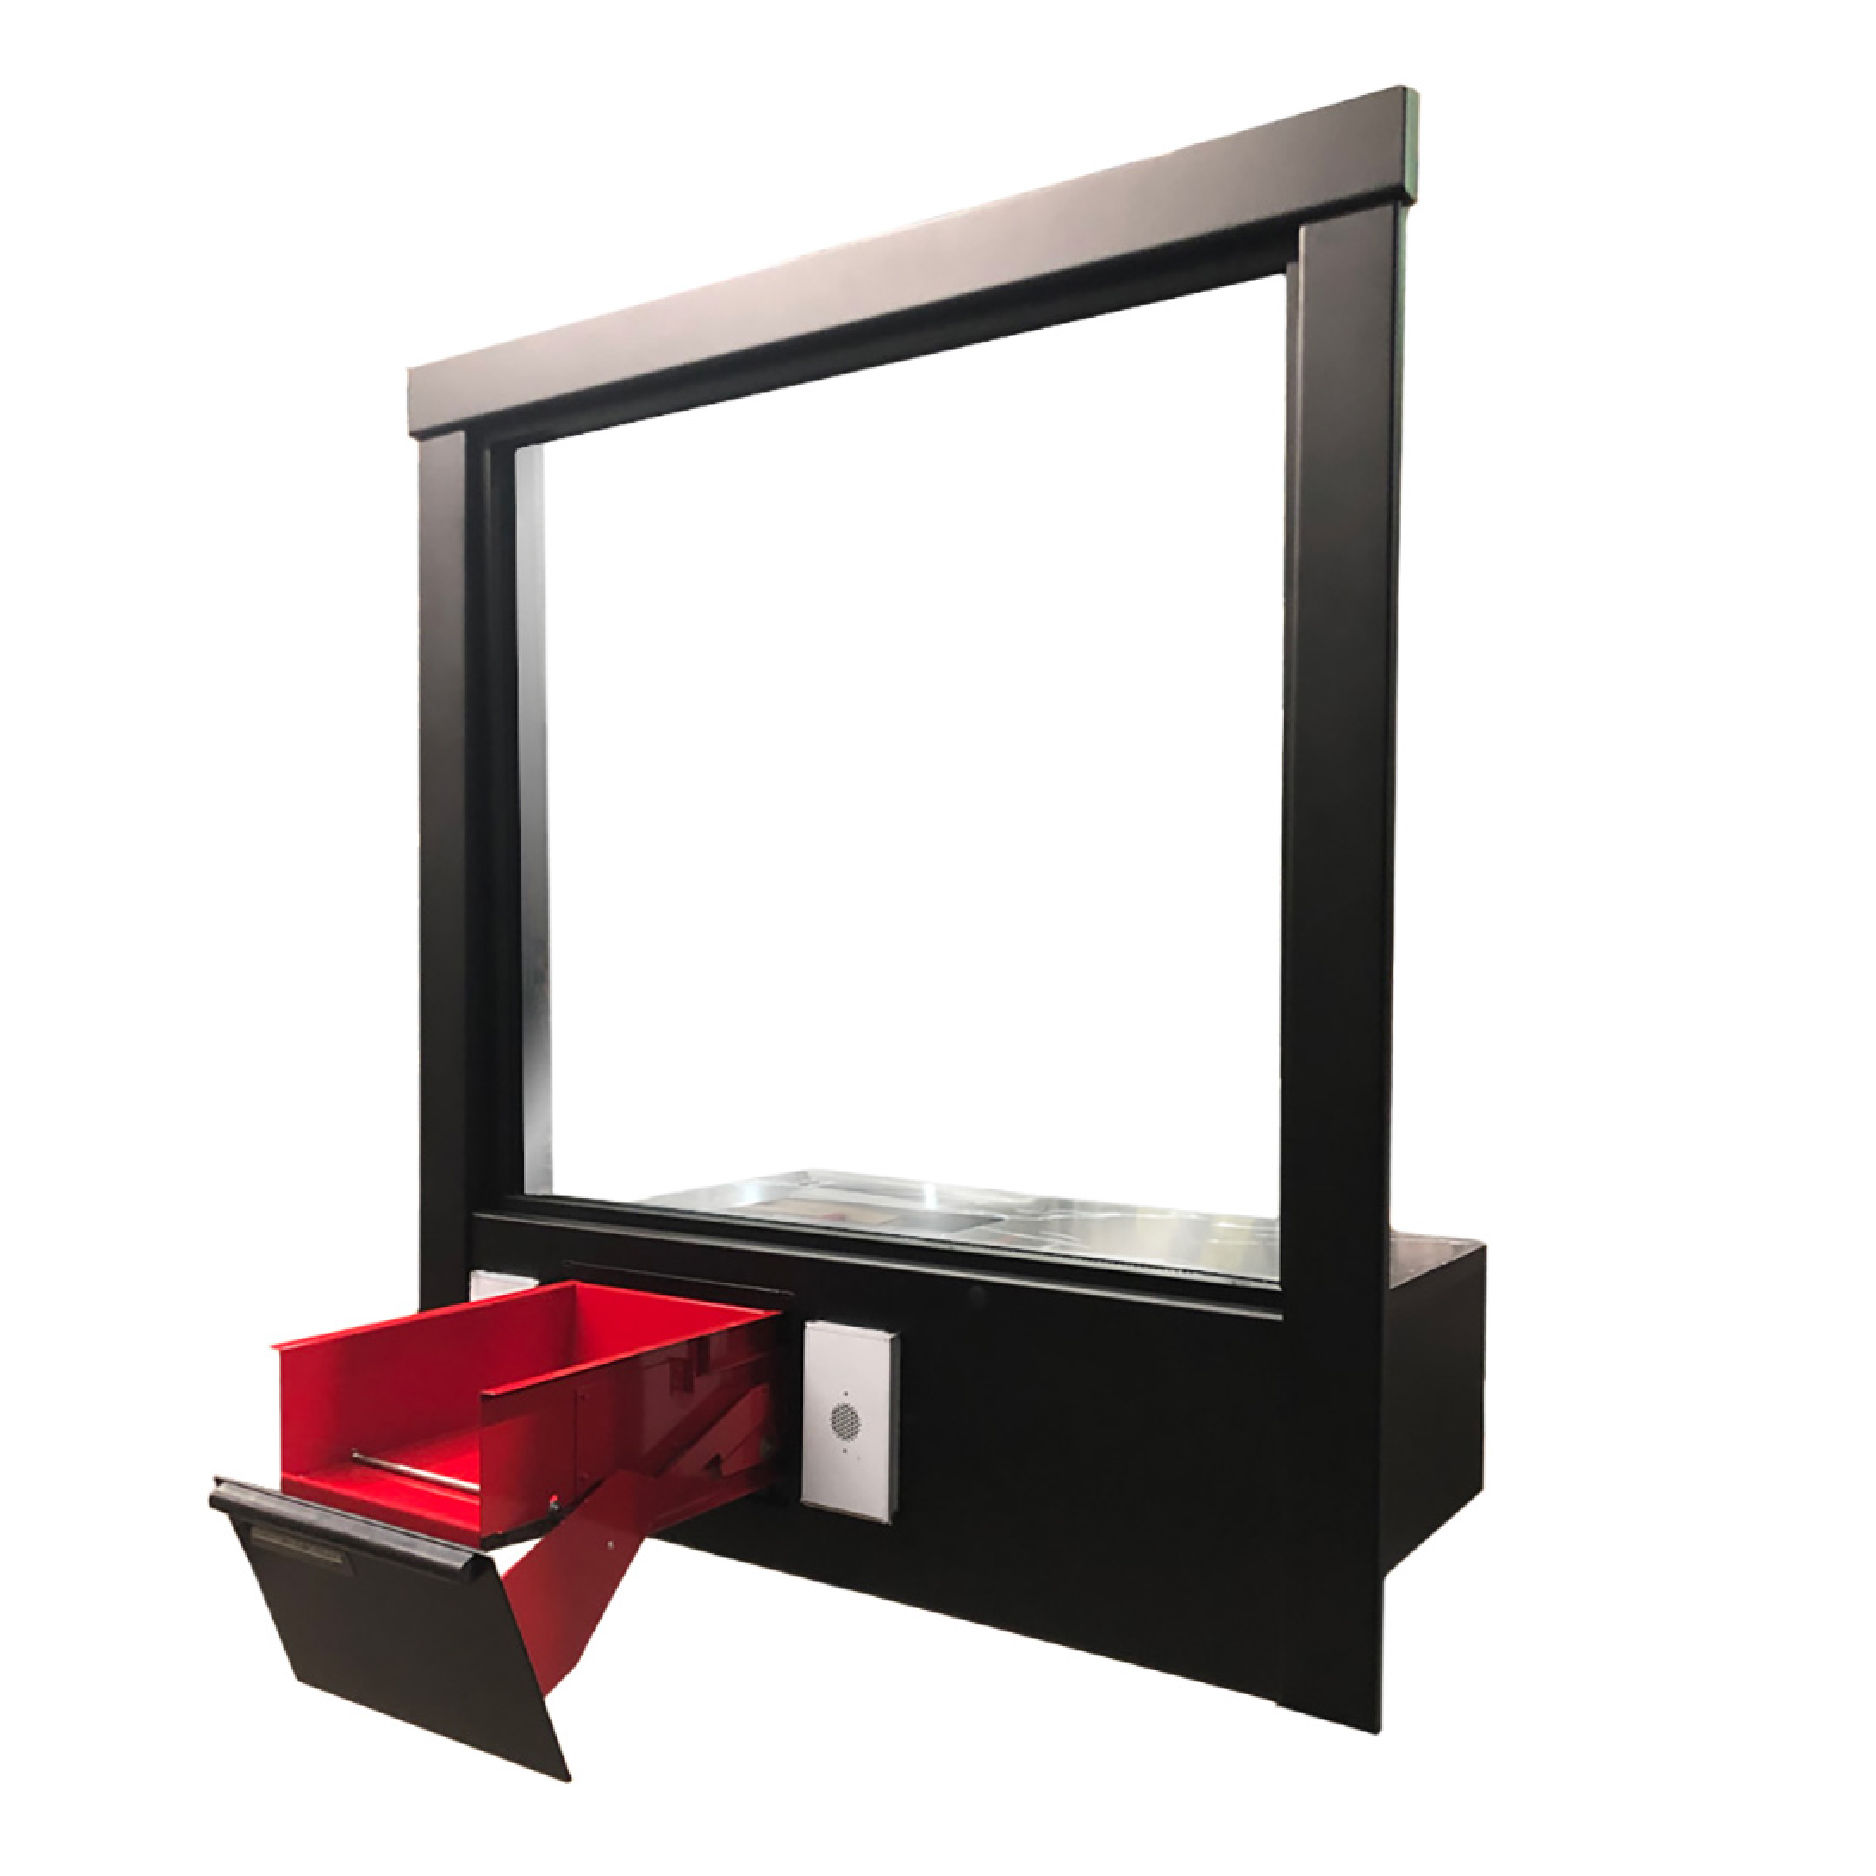 Picture for category 50x60 Window-Drawer Combination Unit - 12001017